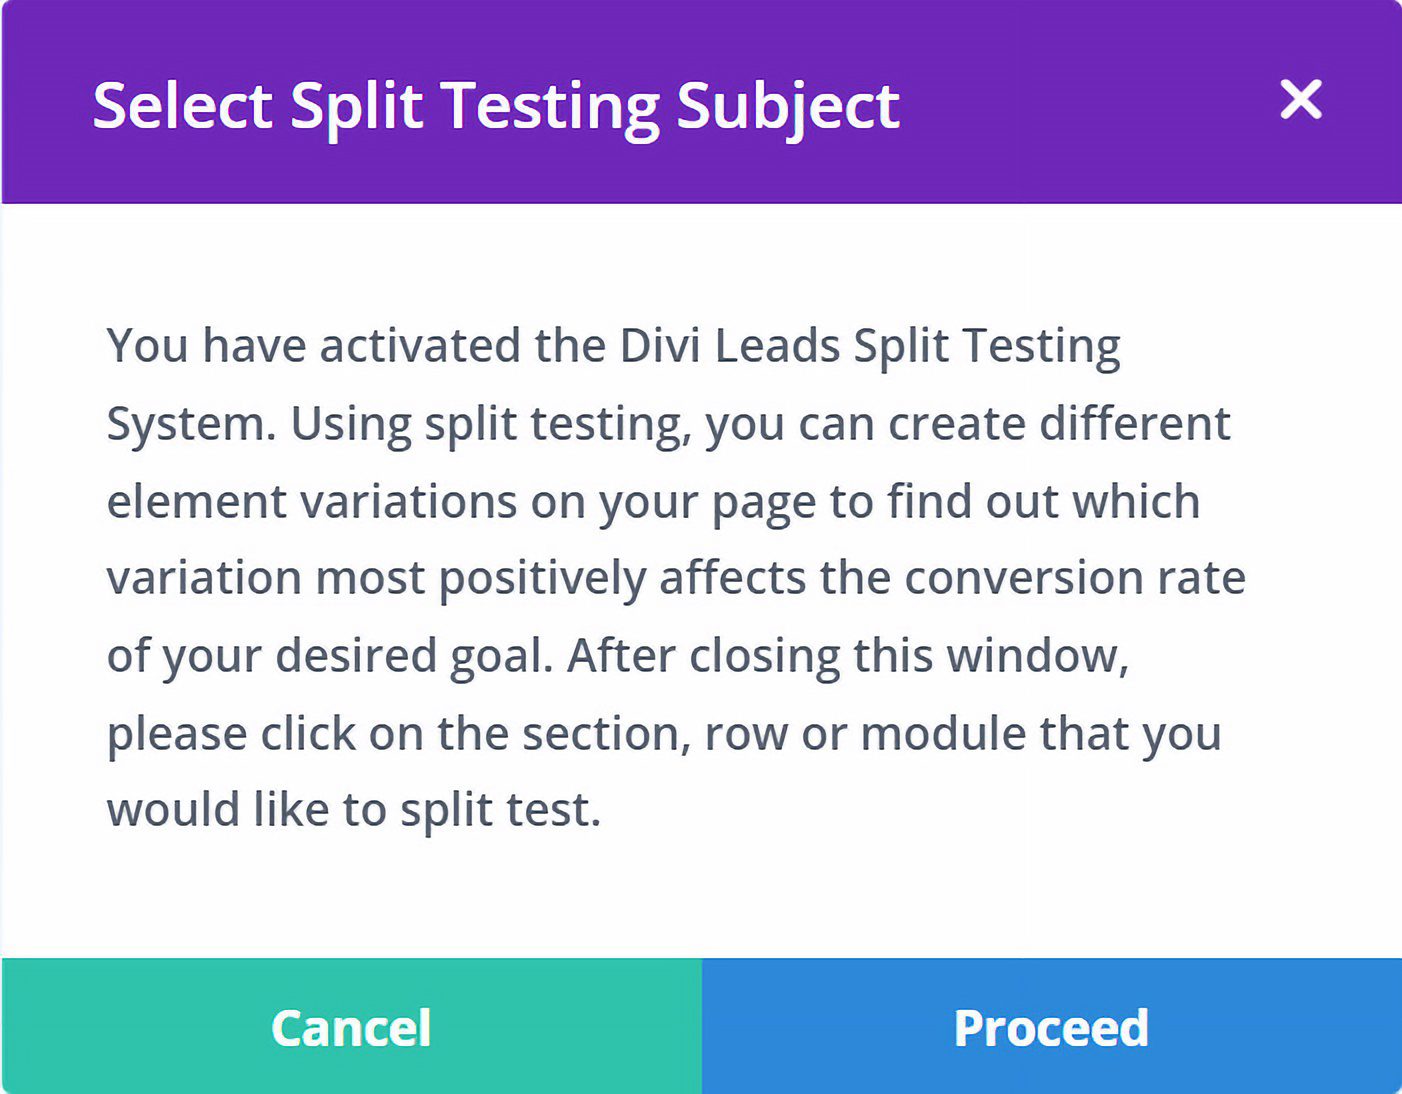 Select Split Testing Subject for the LP A B Test